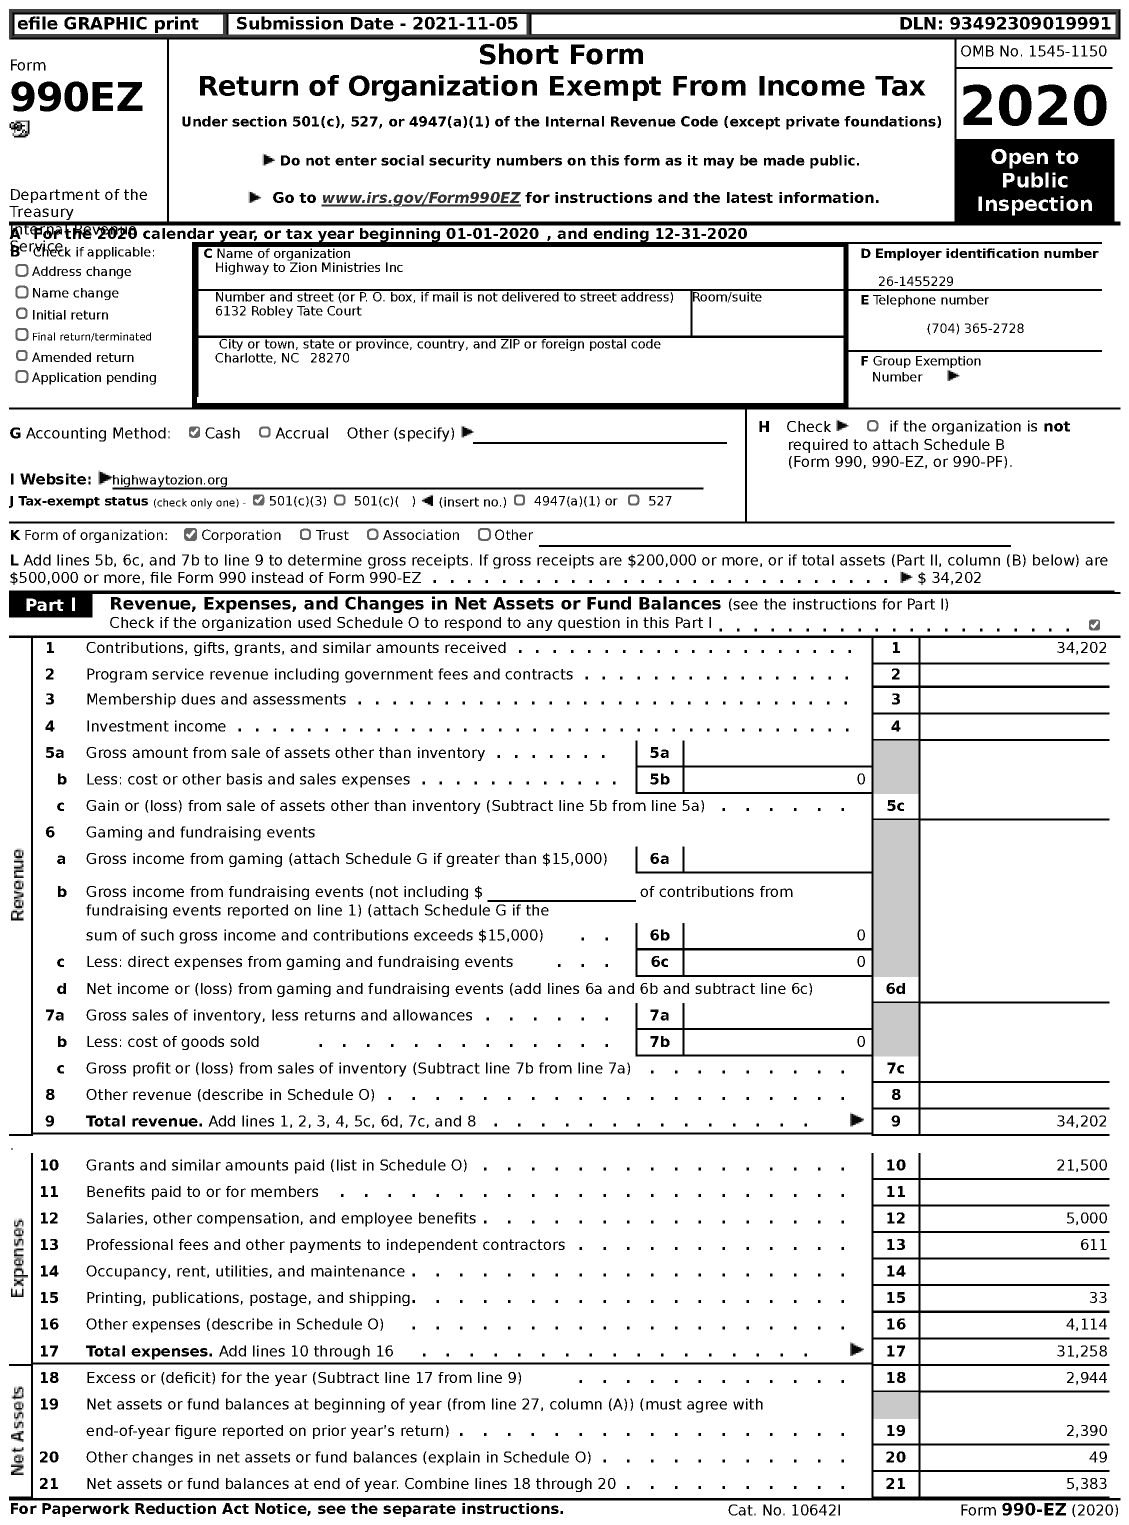 Image of first page of 2020 Form 990EZ for Highway to Zion Ministries